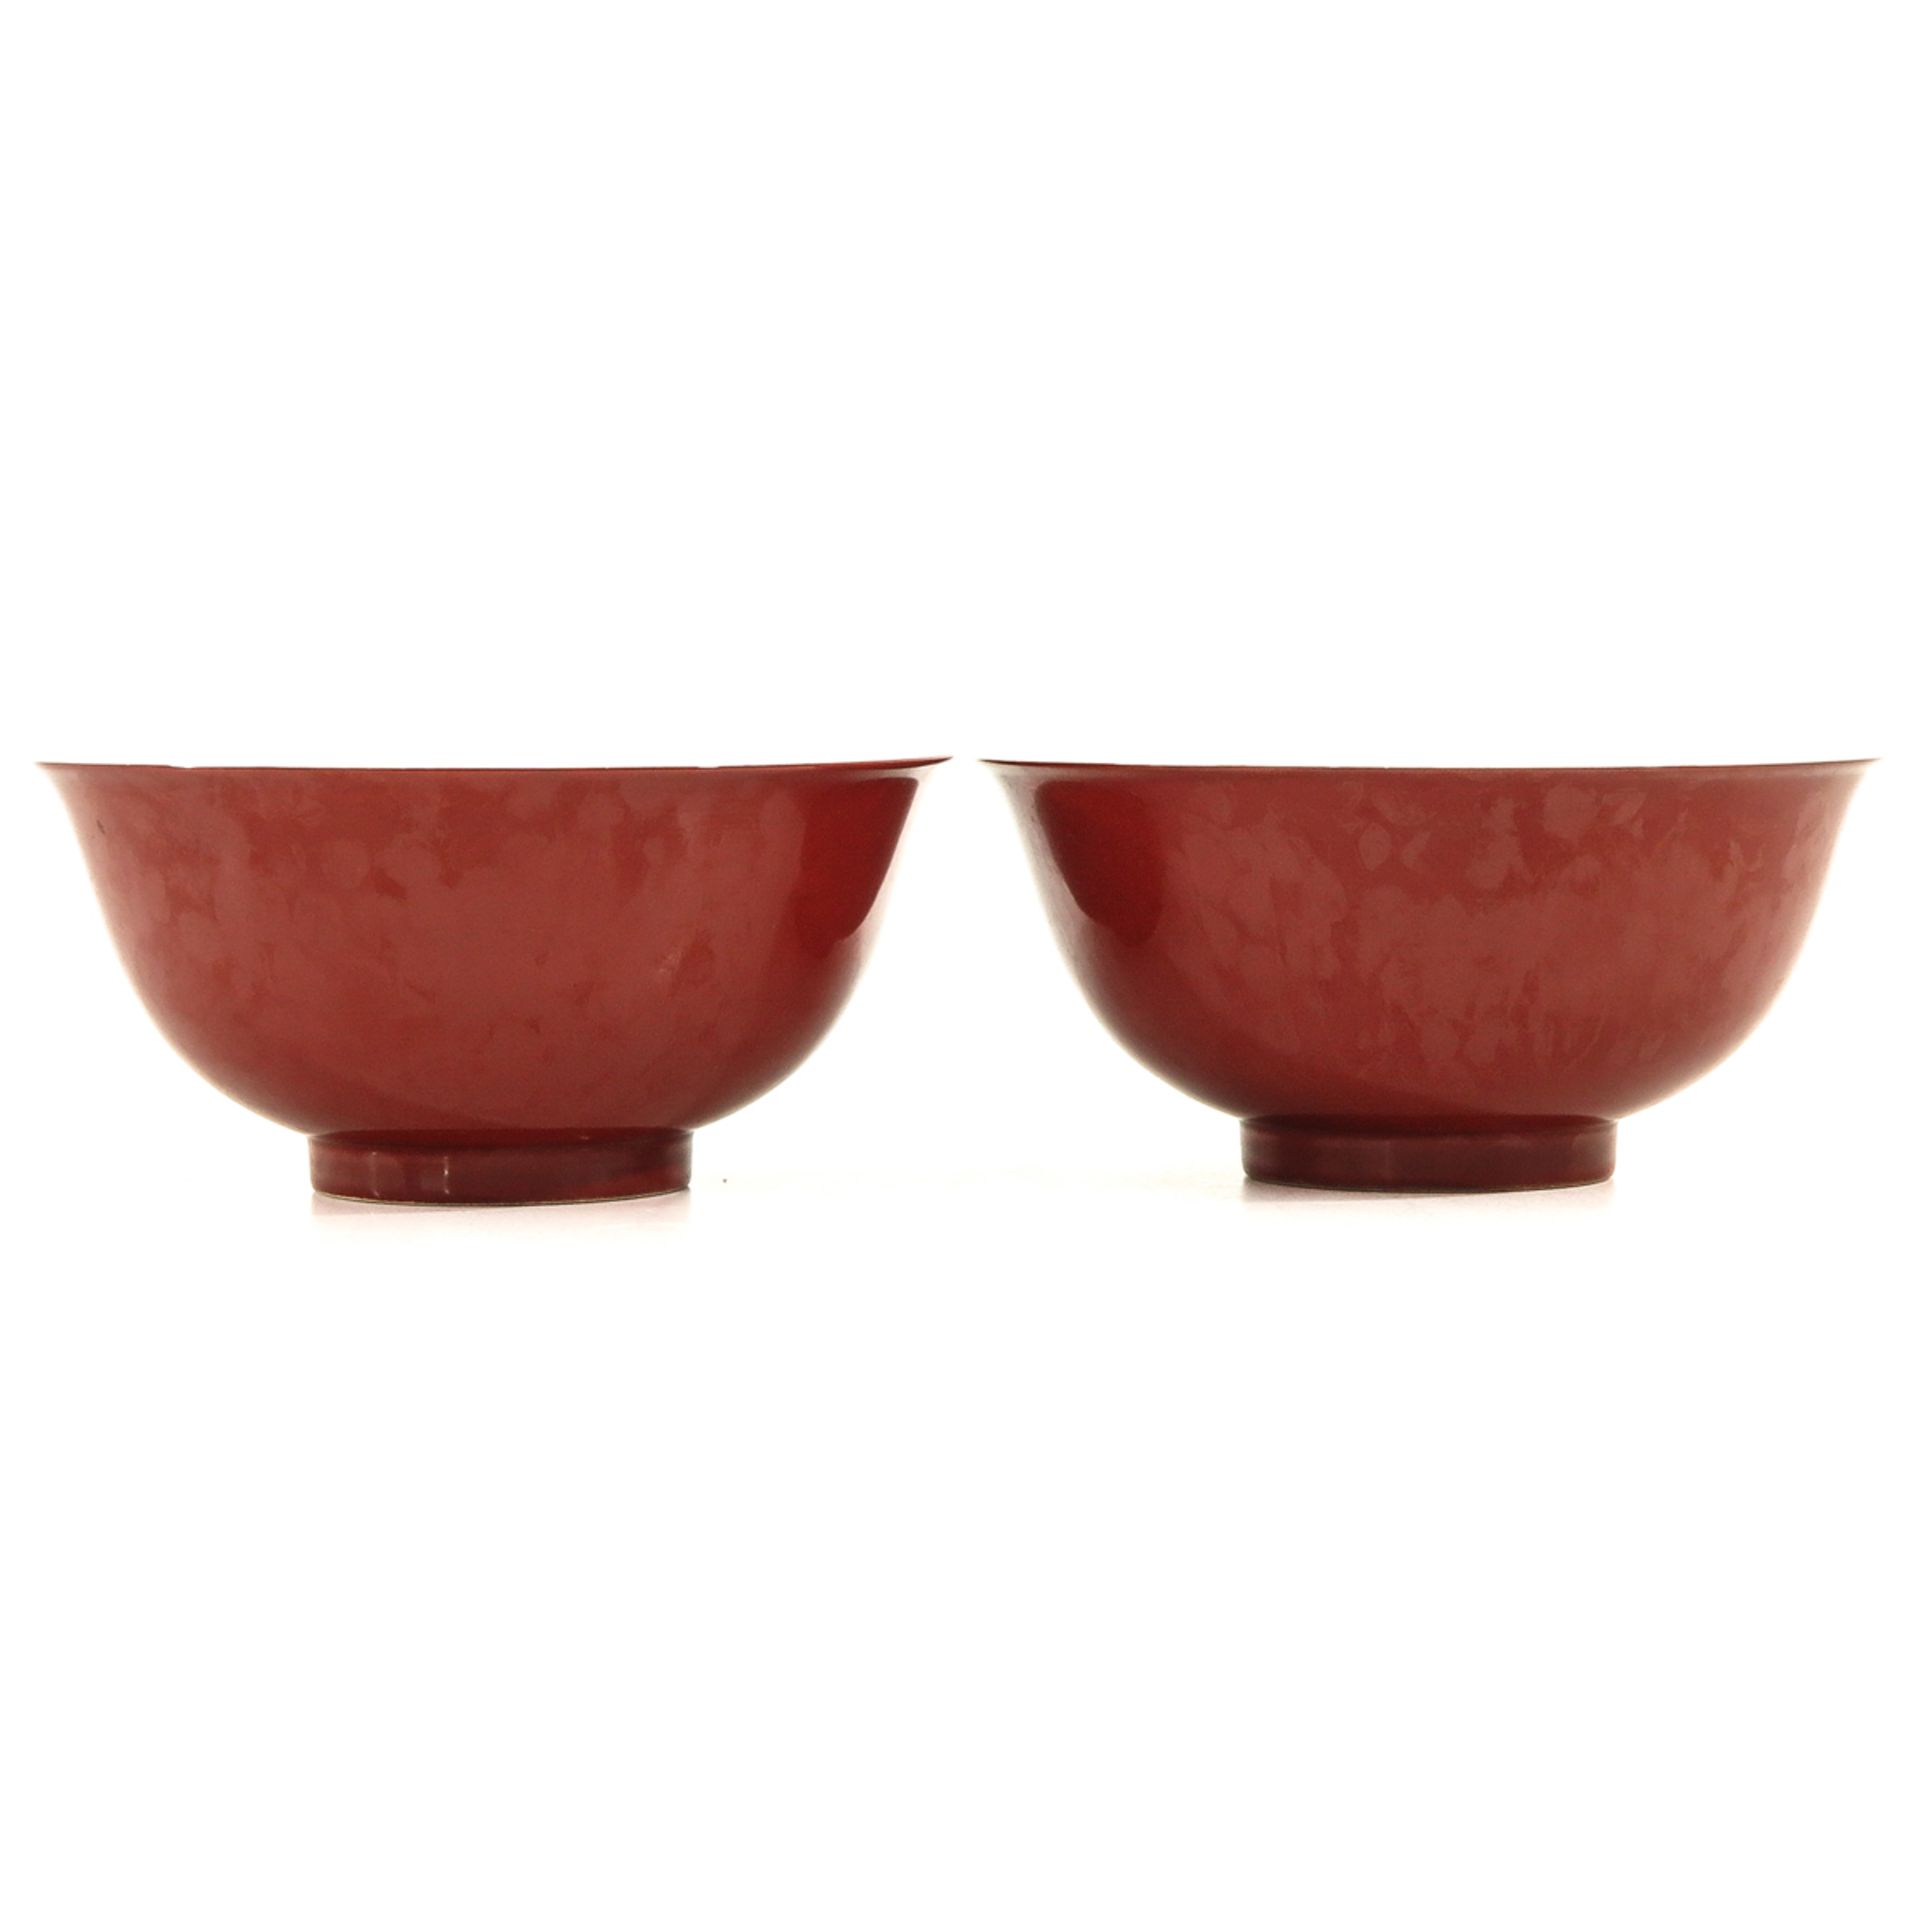 A Pair of Famille Rose Bowls - Image 2 of 10